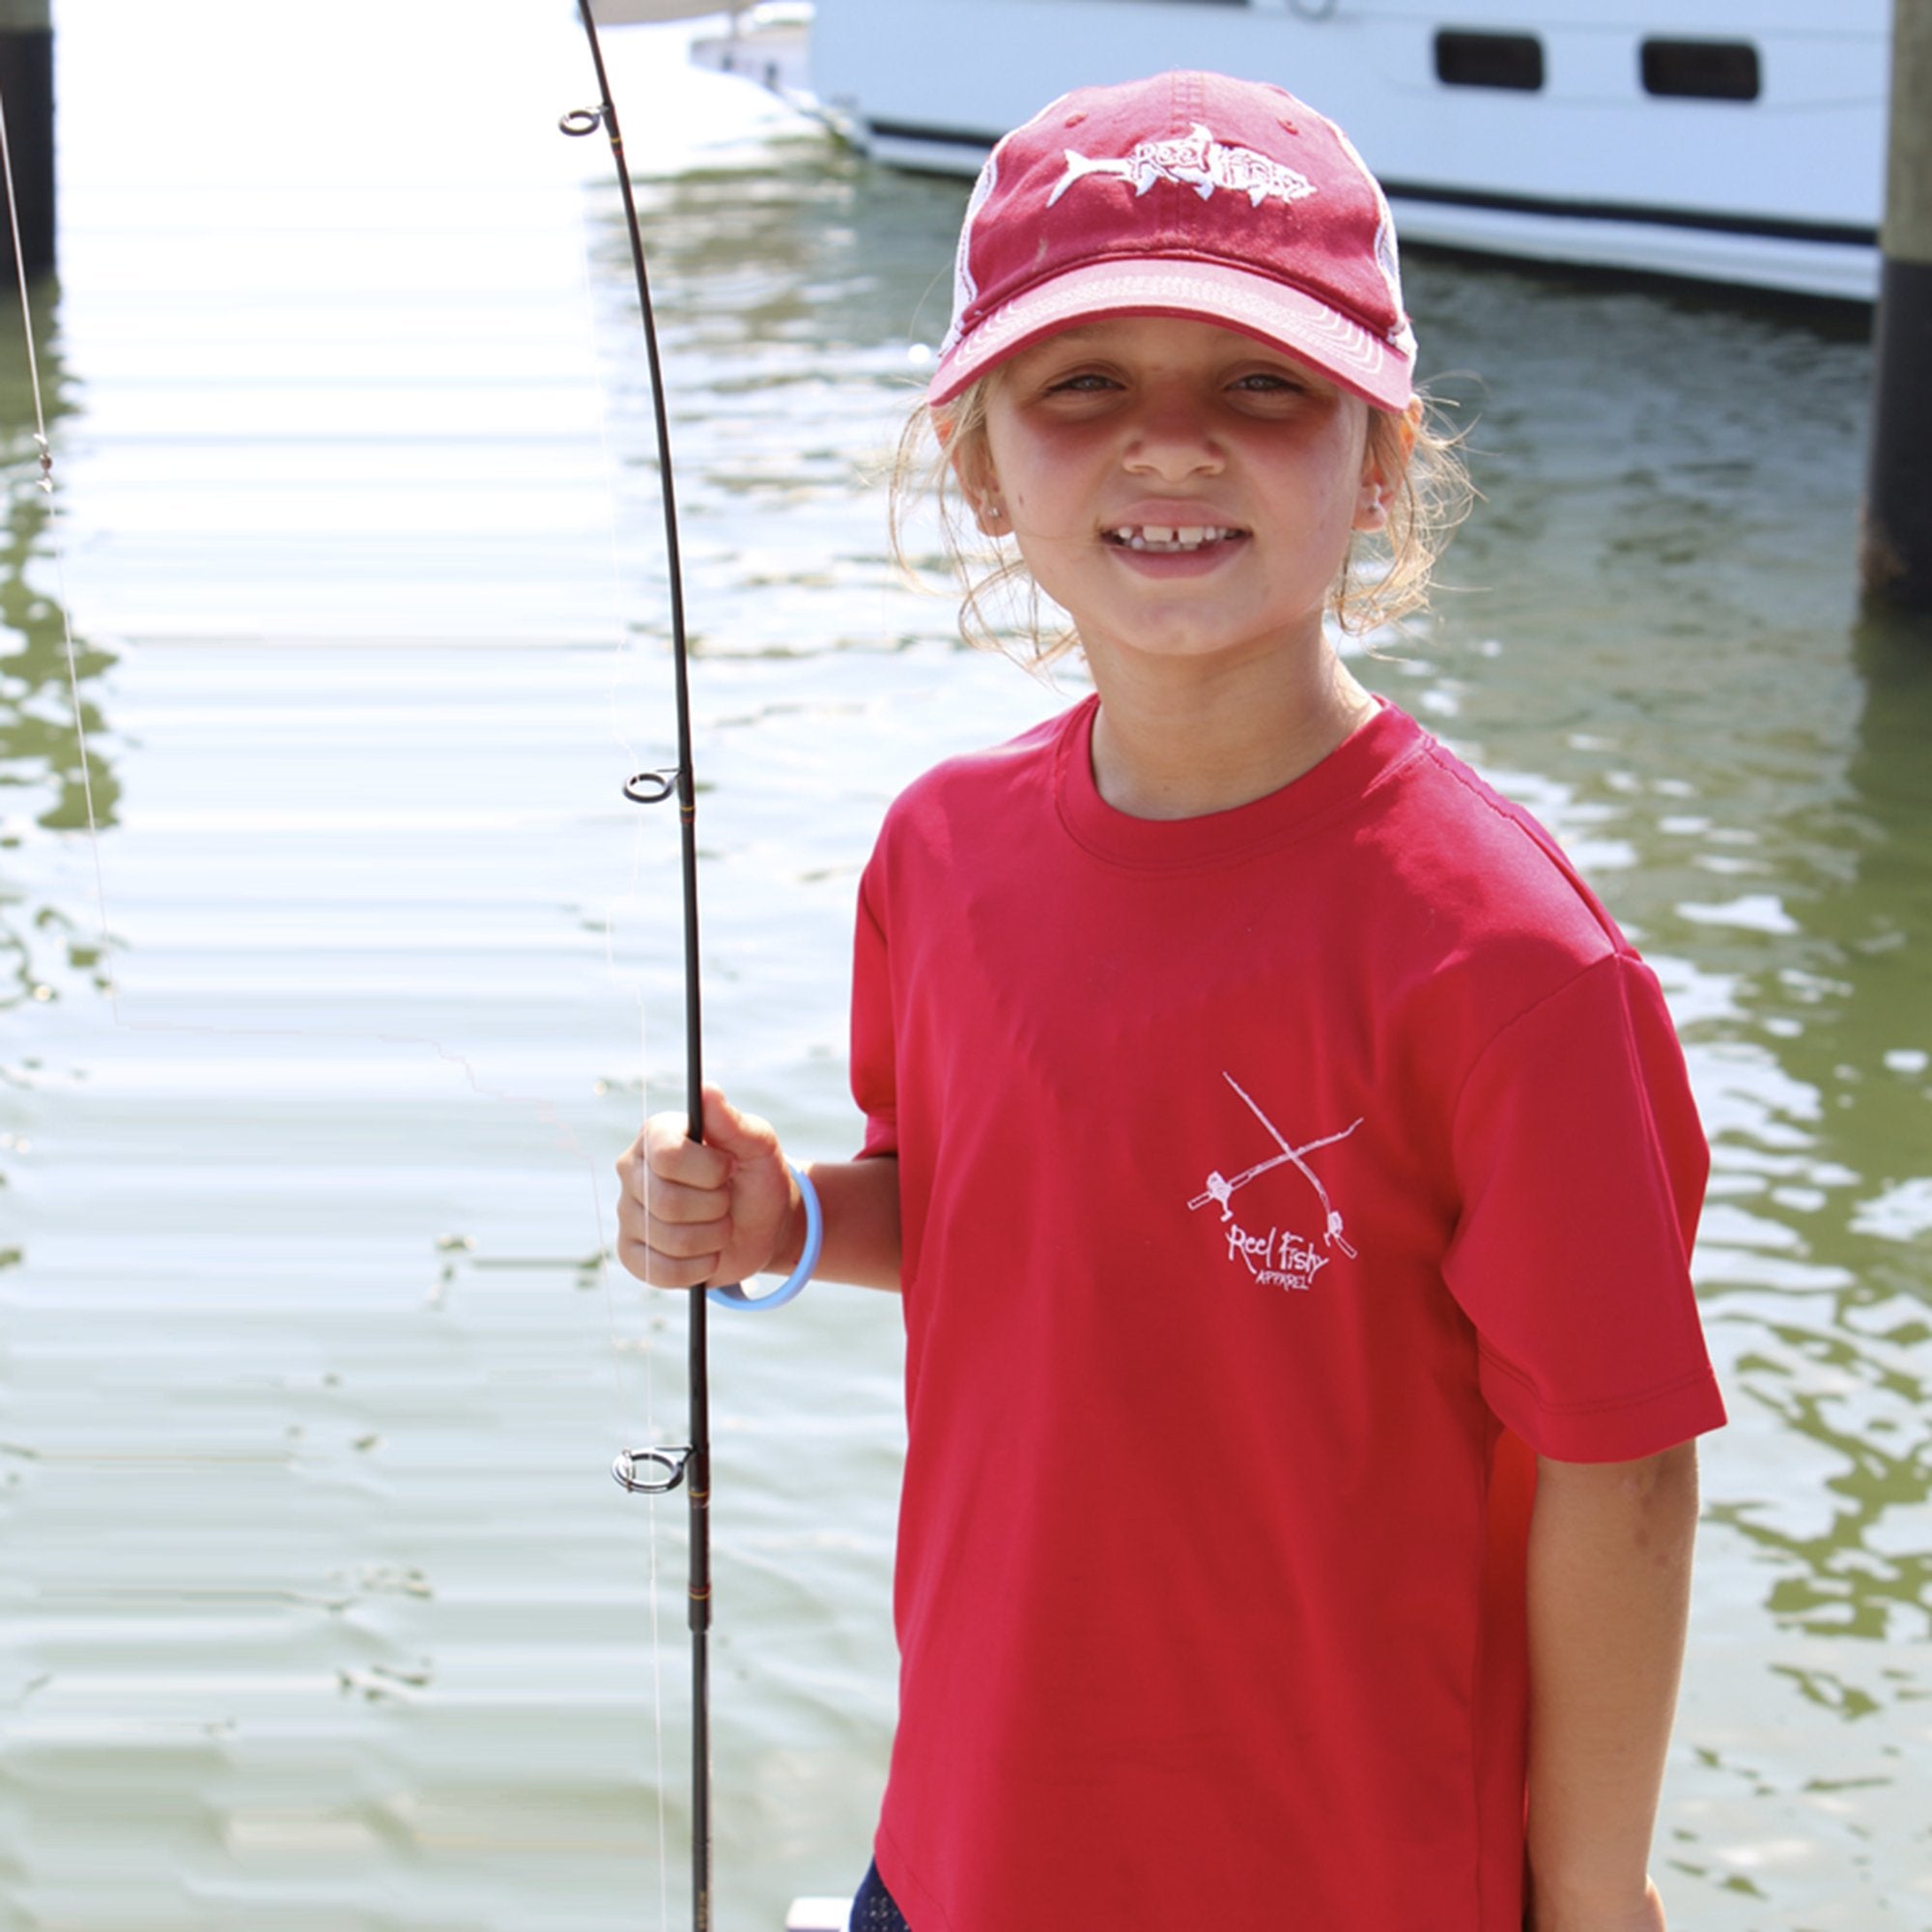 Youth/Kids Fishing Shirts Snook, Redfish & Trout Youth-Small-6-8 / Seagrass